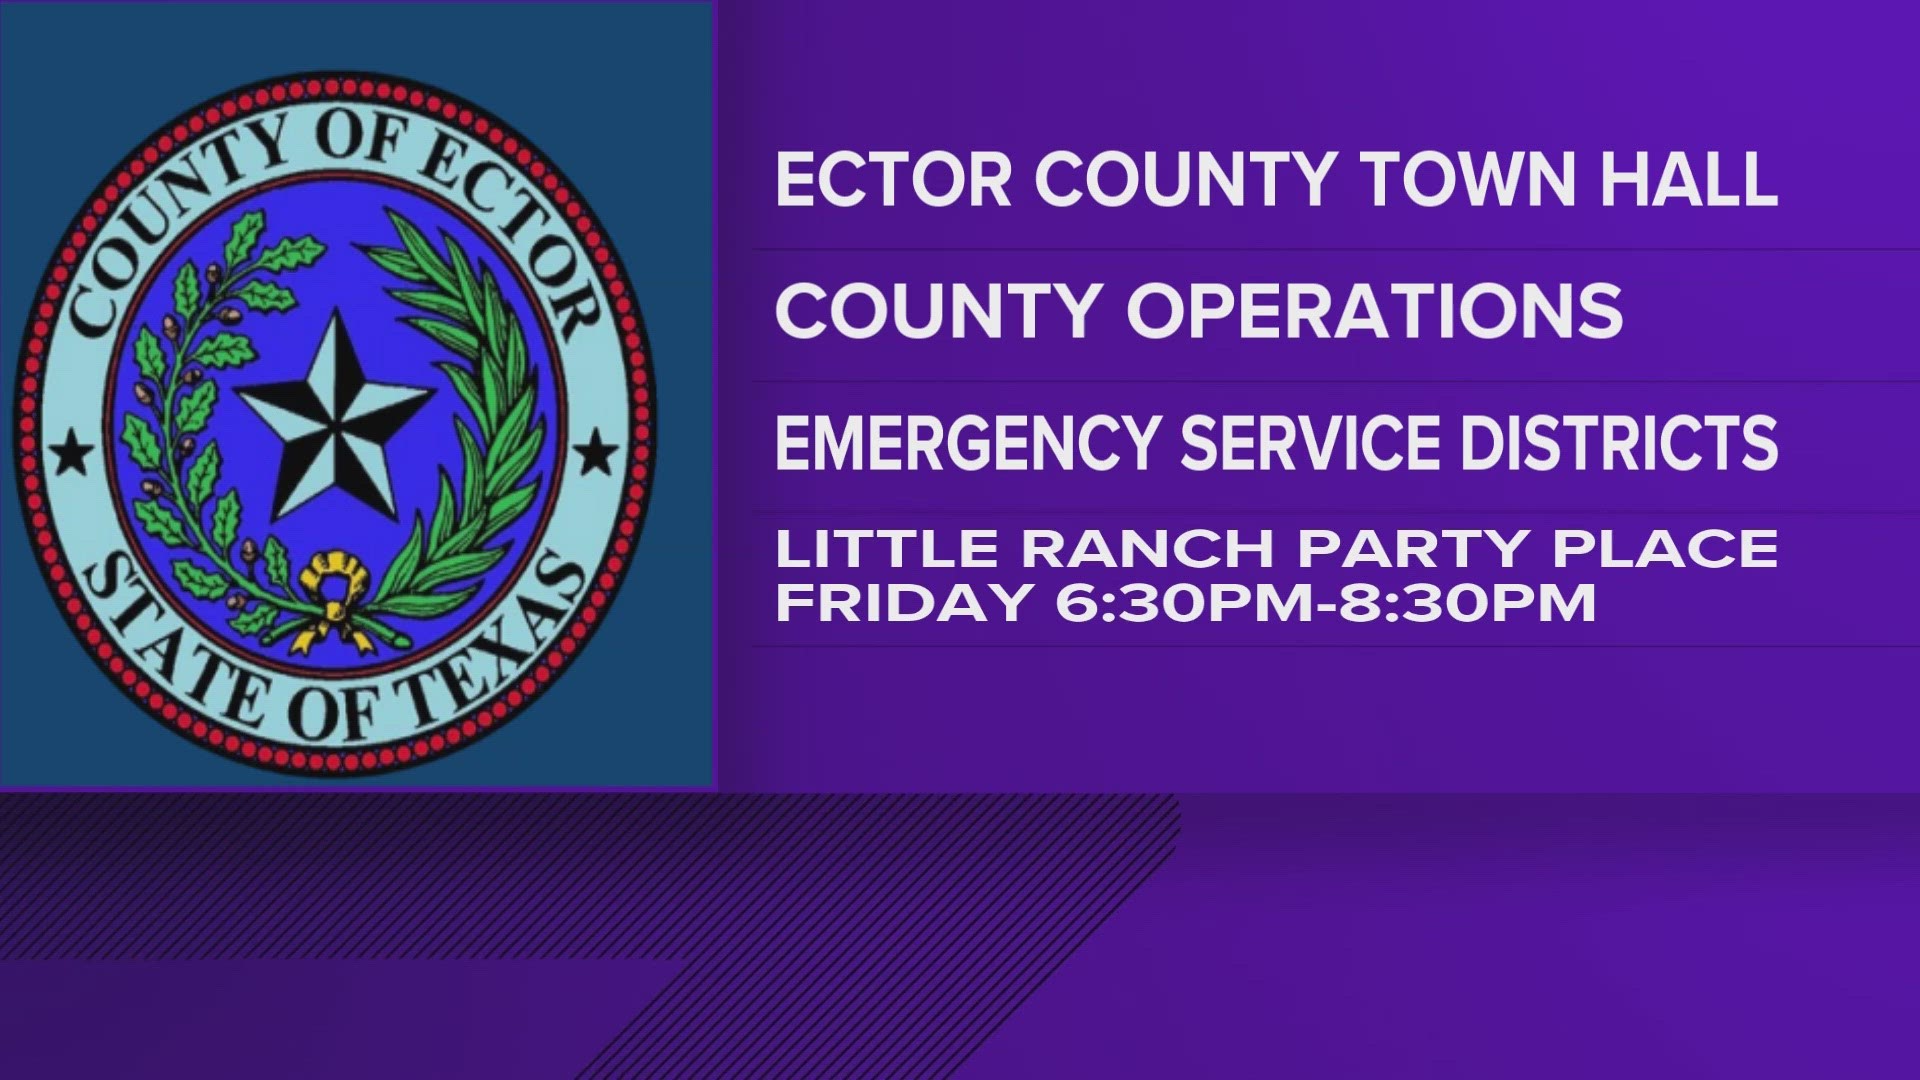 The meeting will take place at Little Ranch Party Place at 6:30 p.m. Friday night.